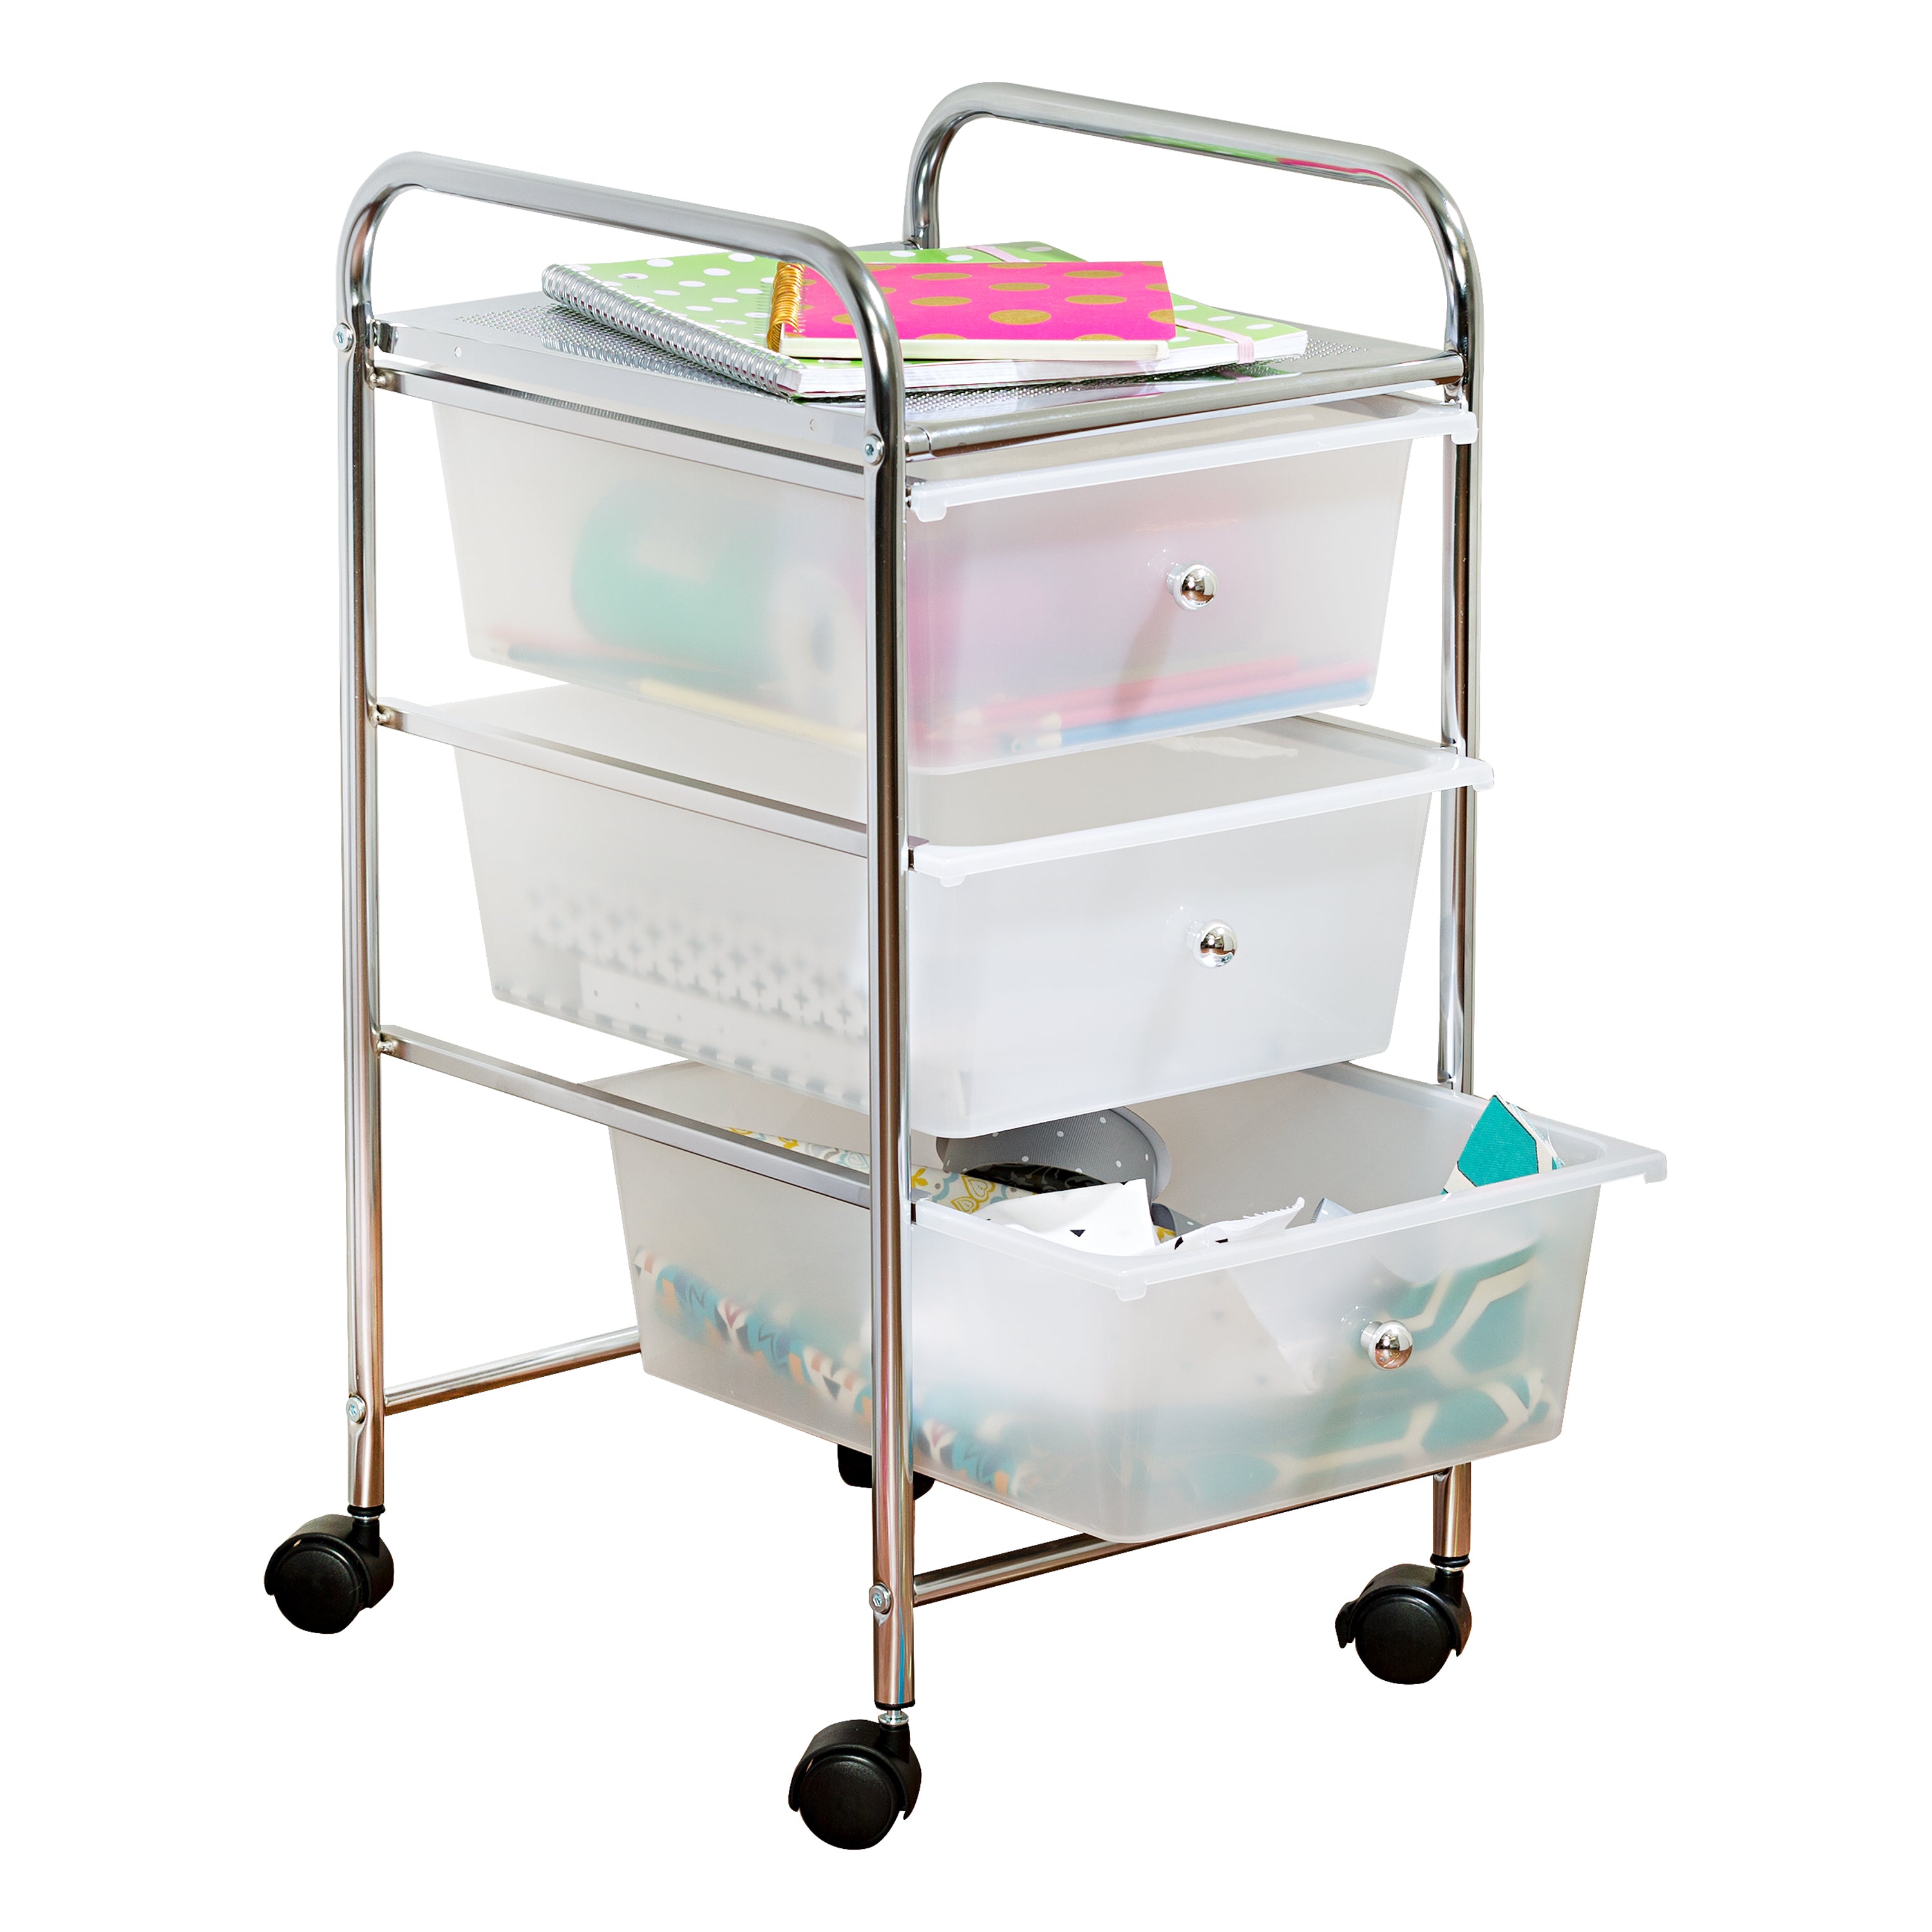 Honey-Can-Do CRT-01451 Heavy Duty Rolling Utility Cart, Chrome Wire, 3-Tier  : : Home